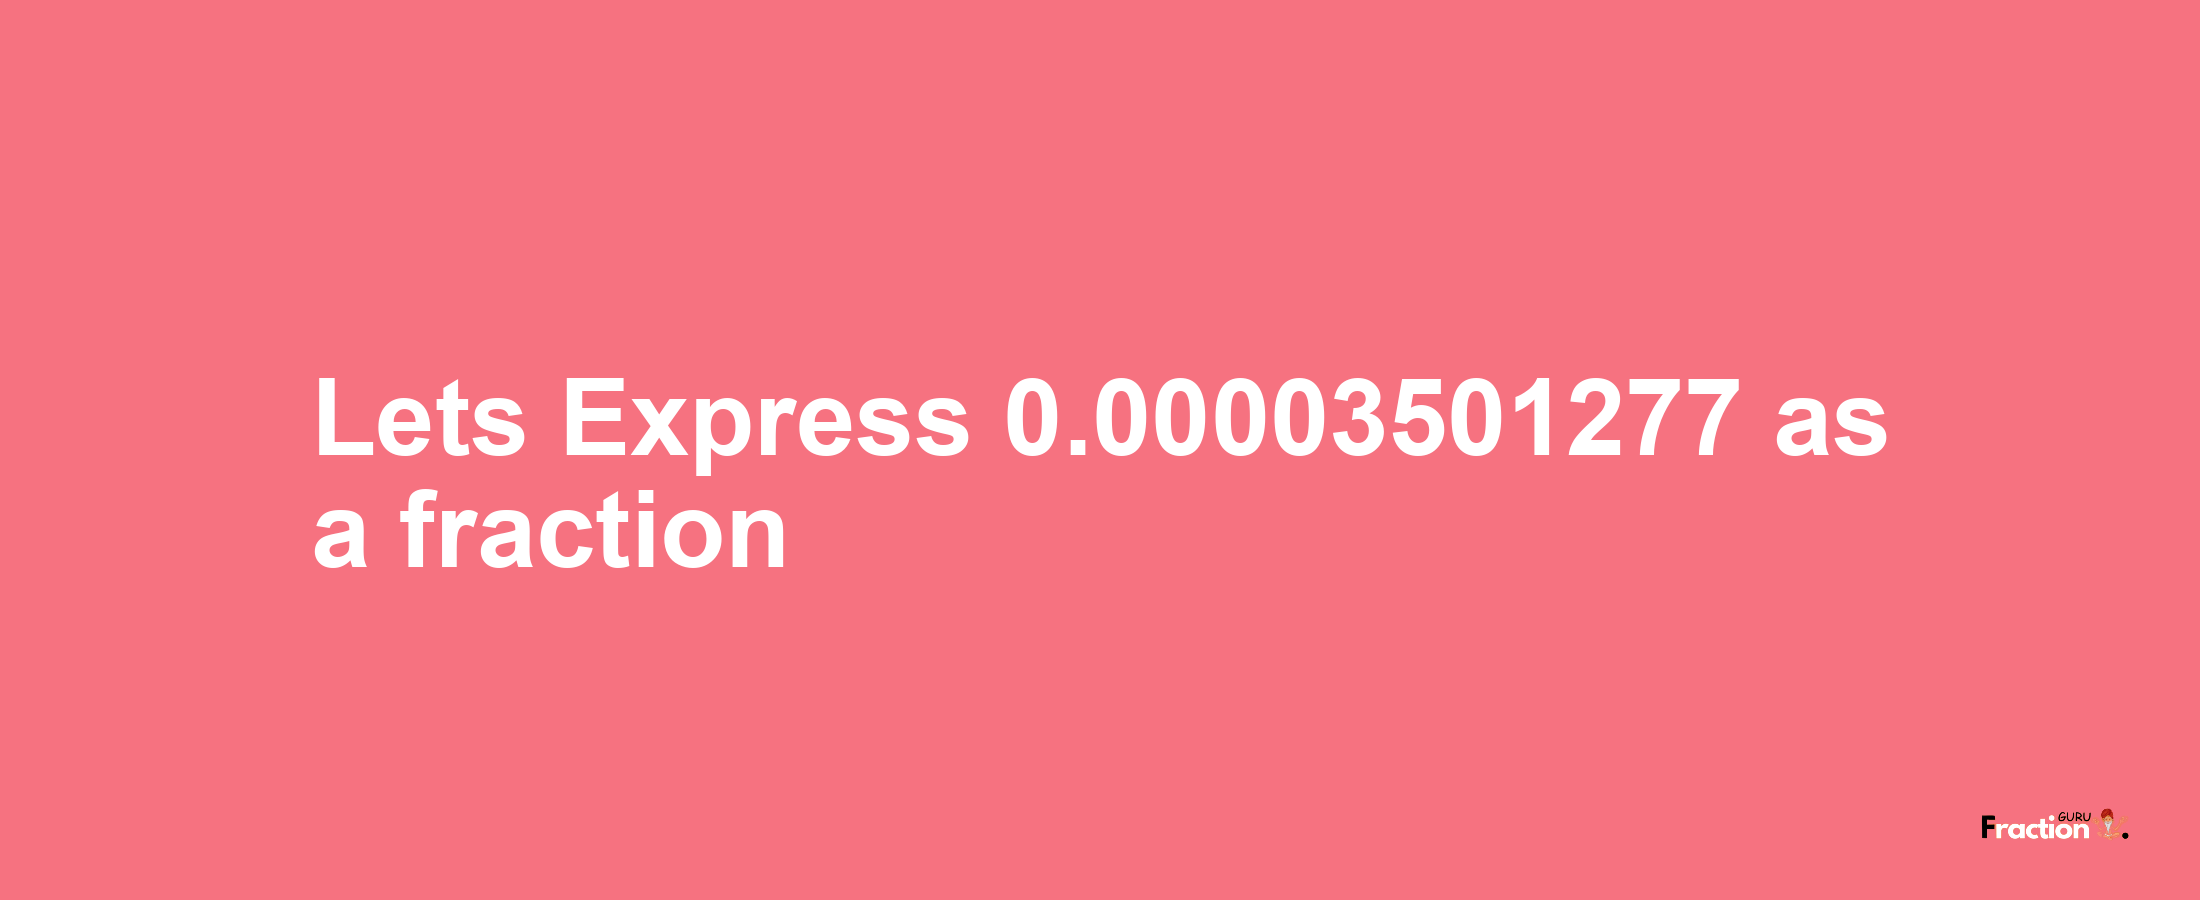 Lets Express 0.00003501277 as afraction